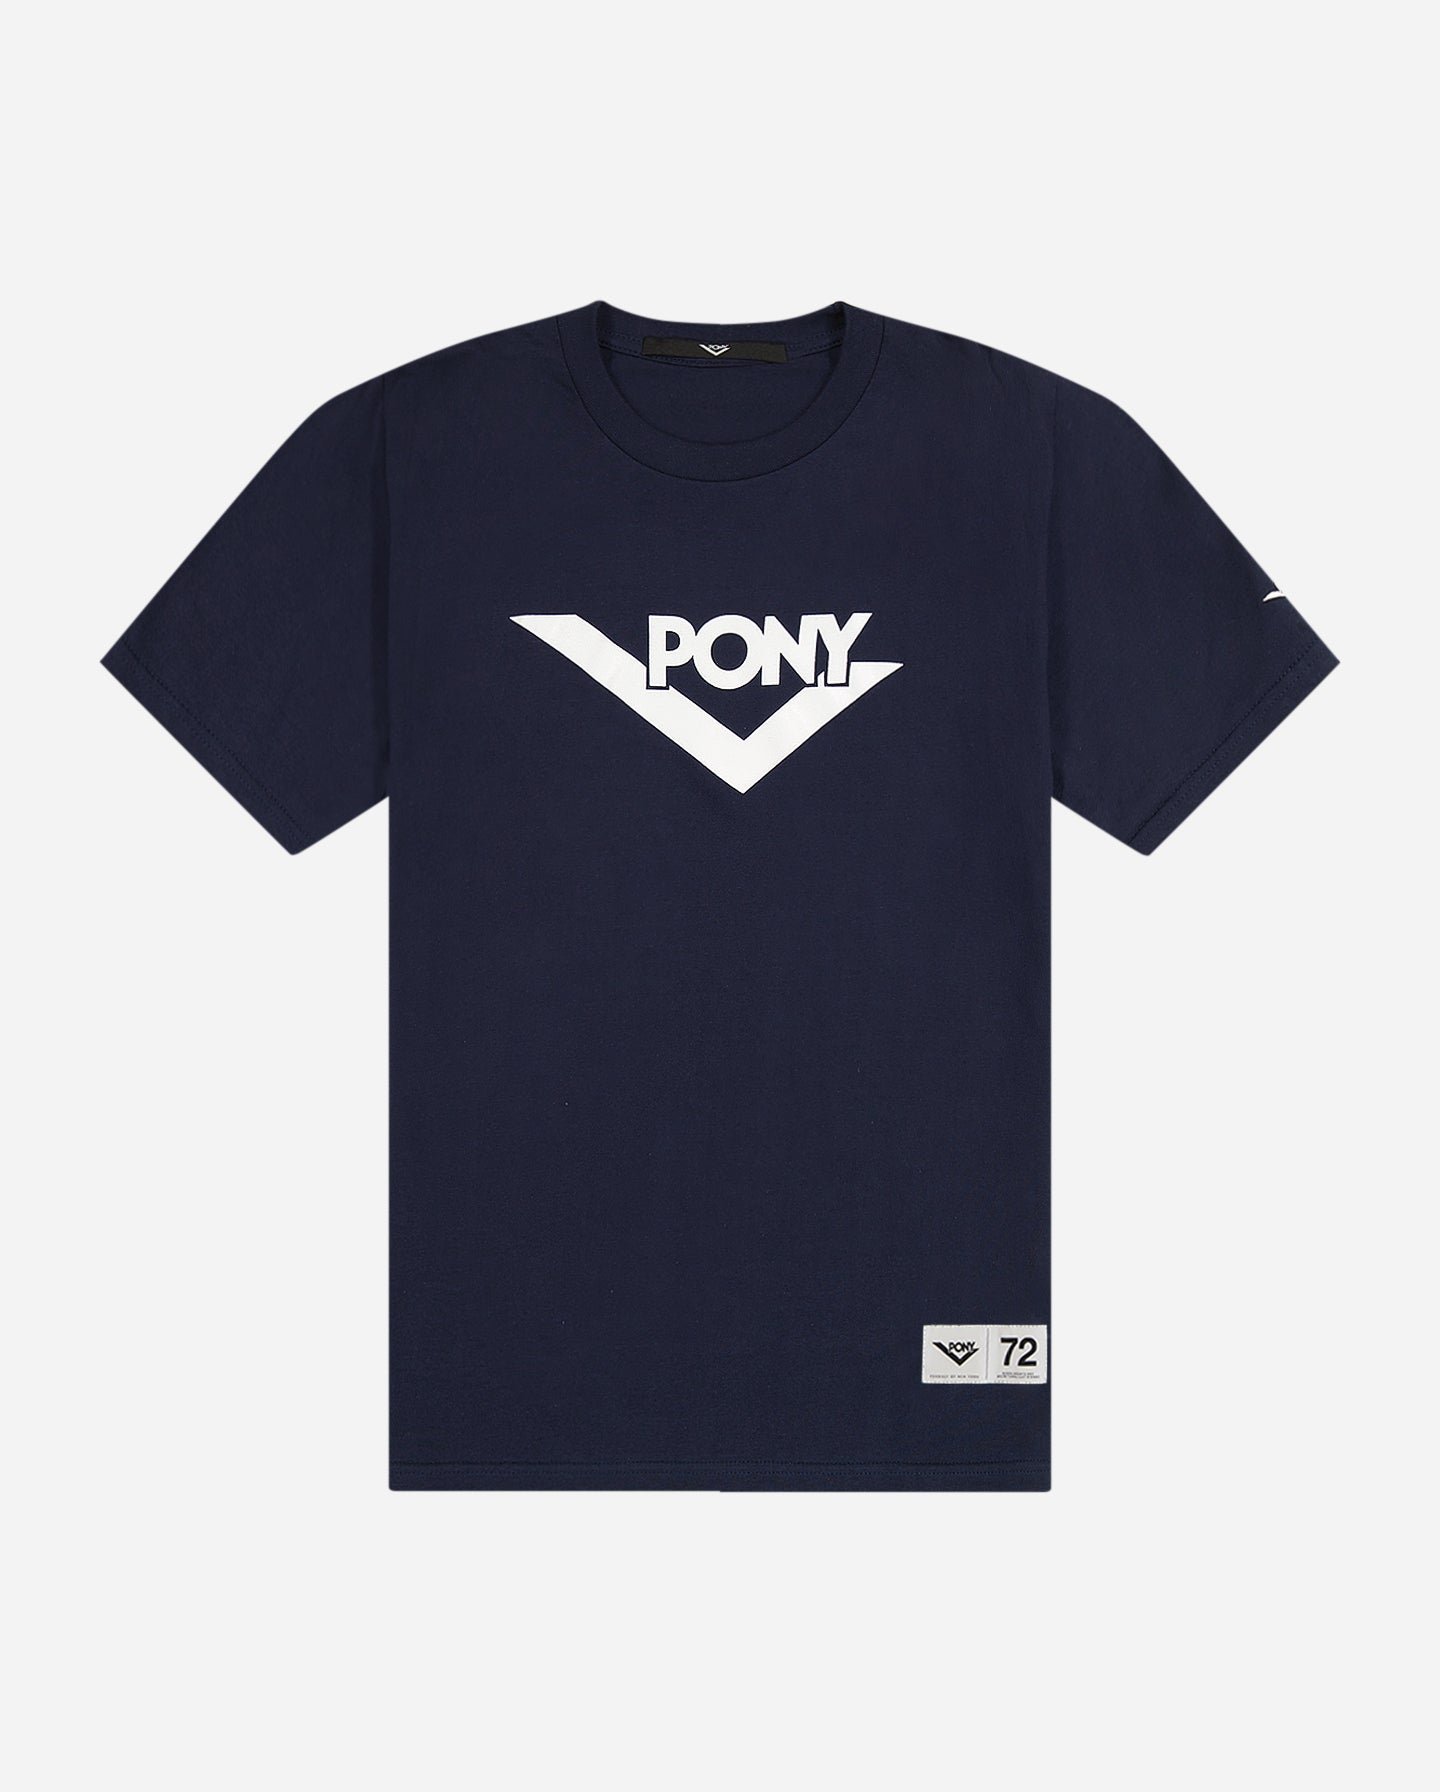 CLASSICS CONTRAST LOCKUP TEE IN NAVY/WHITE - FRONT VIEW